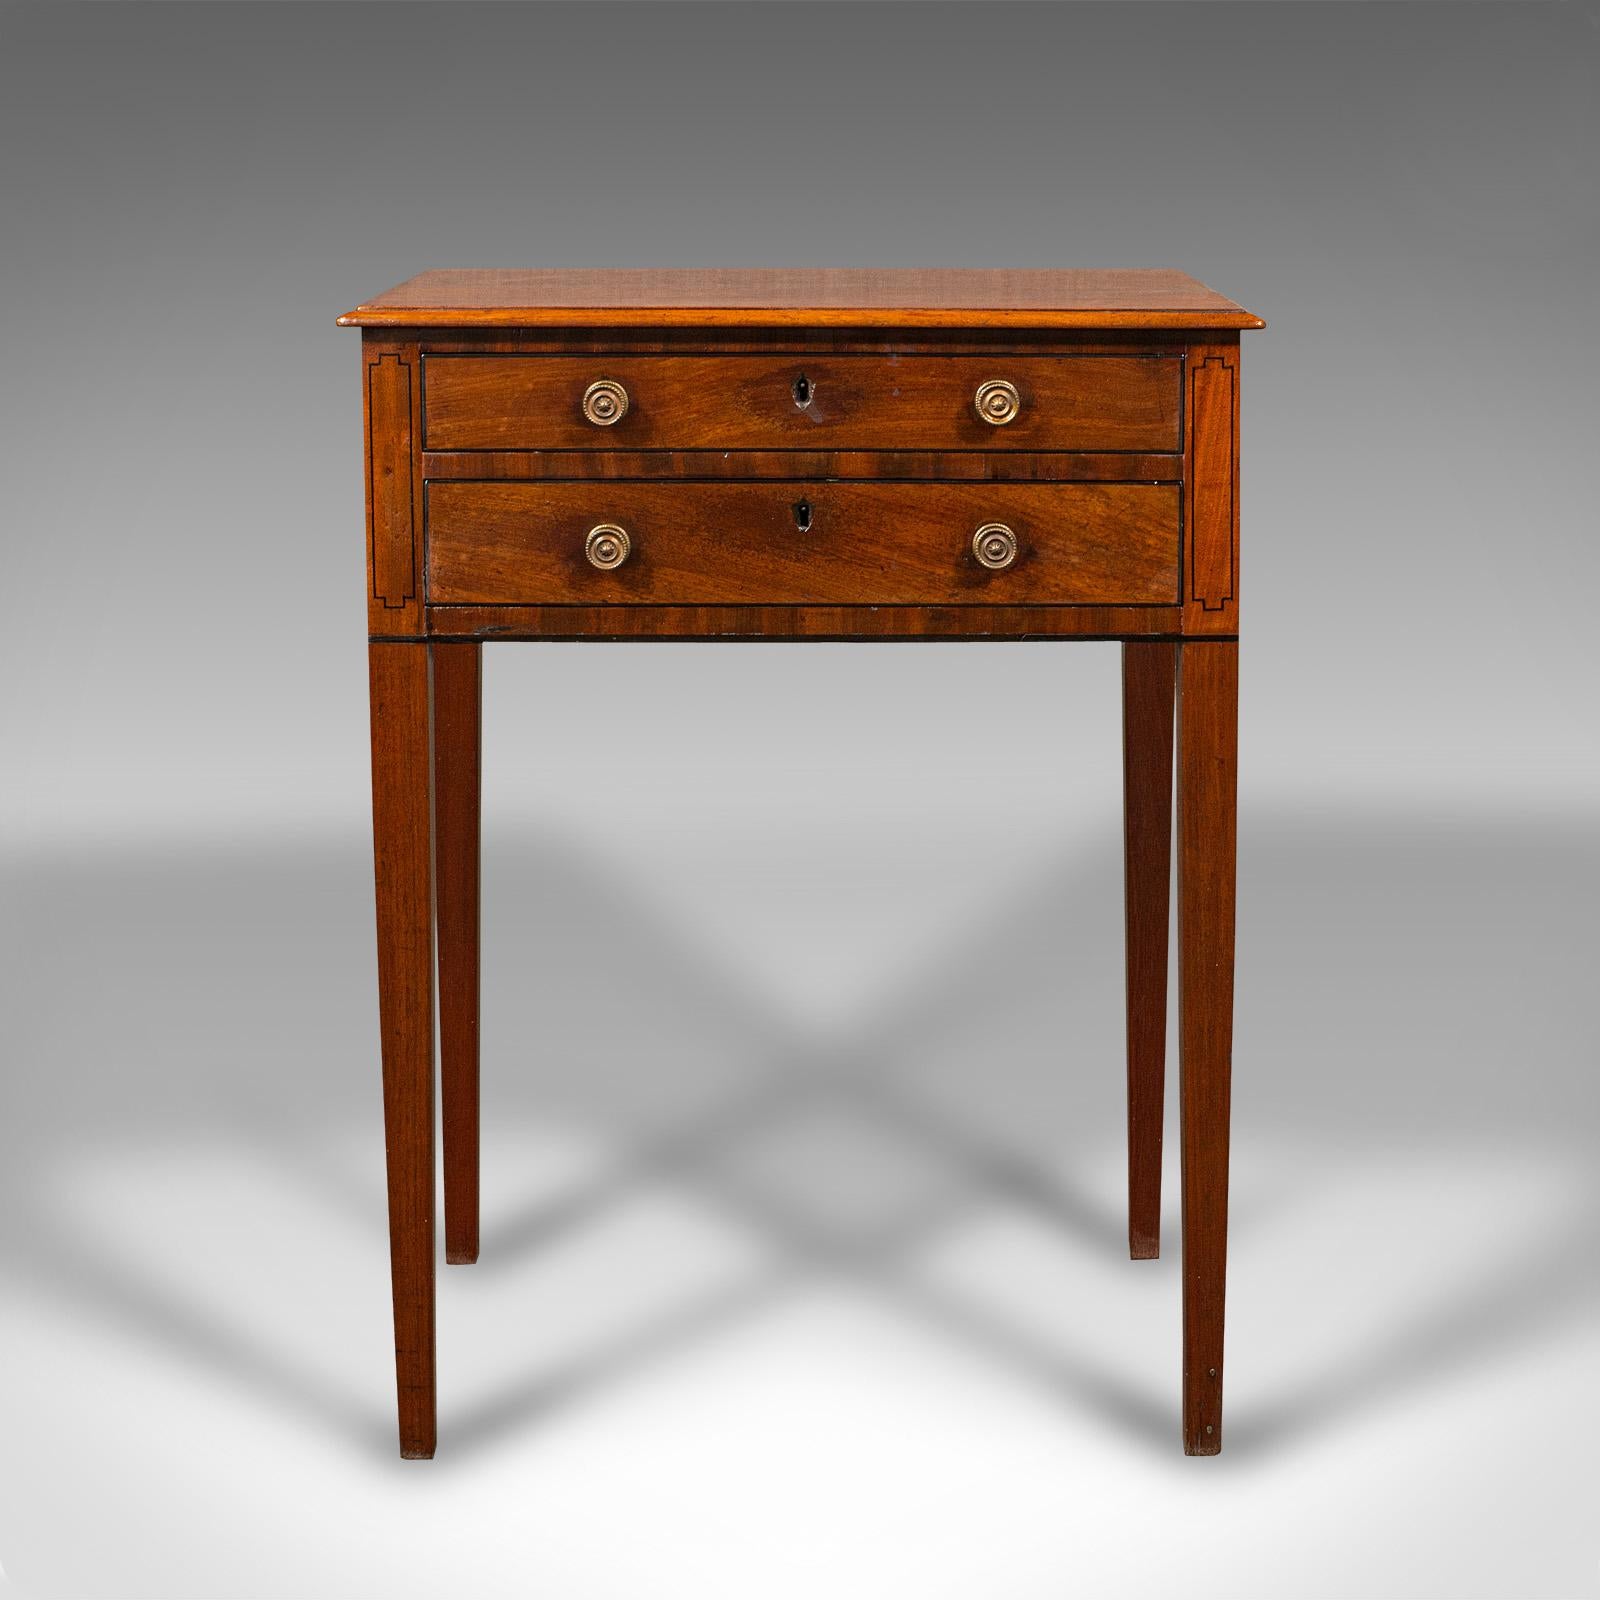 This is a small antique sewing table. An English, mahogany bureau or correspondence desk, dating to the Regency period, circa 1820.

Superb craftsmanship with pleasingly diminutive proportions
Displays a desirable aged patina and in very good